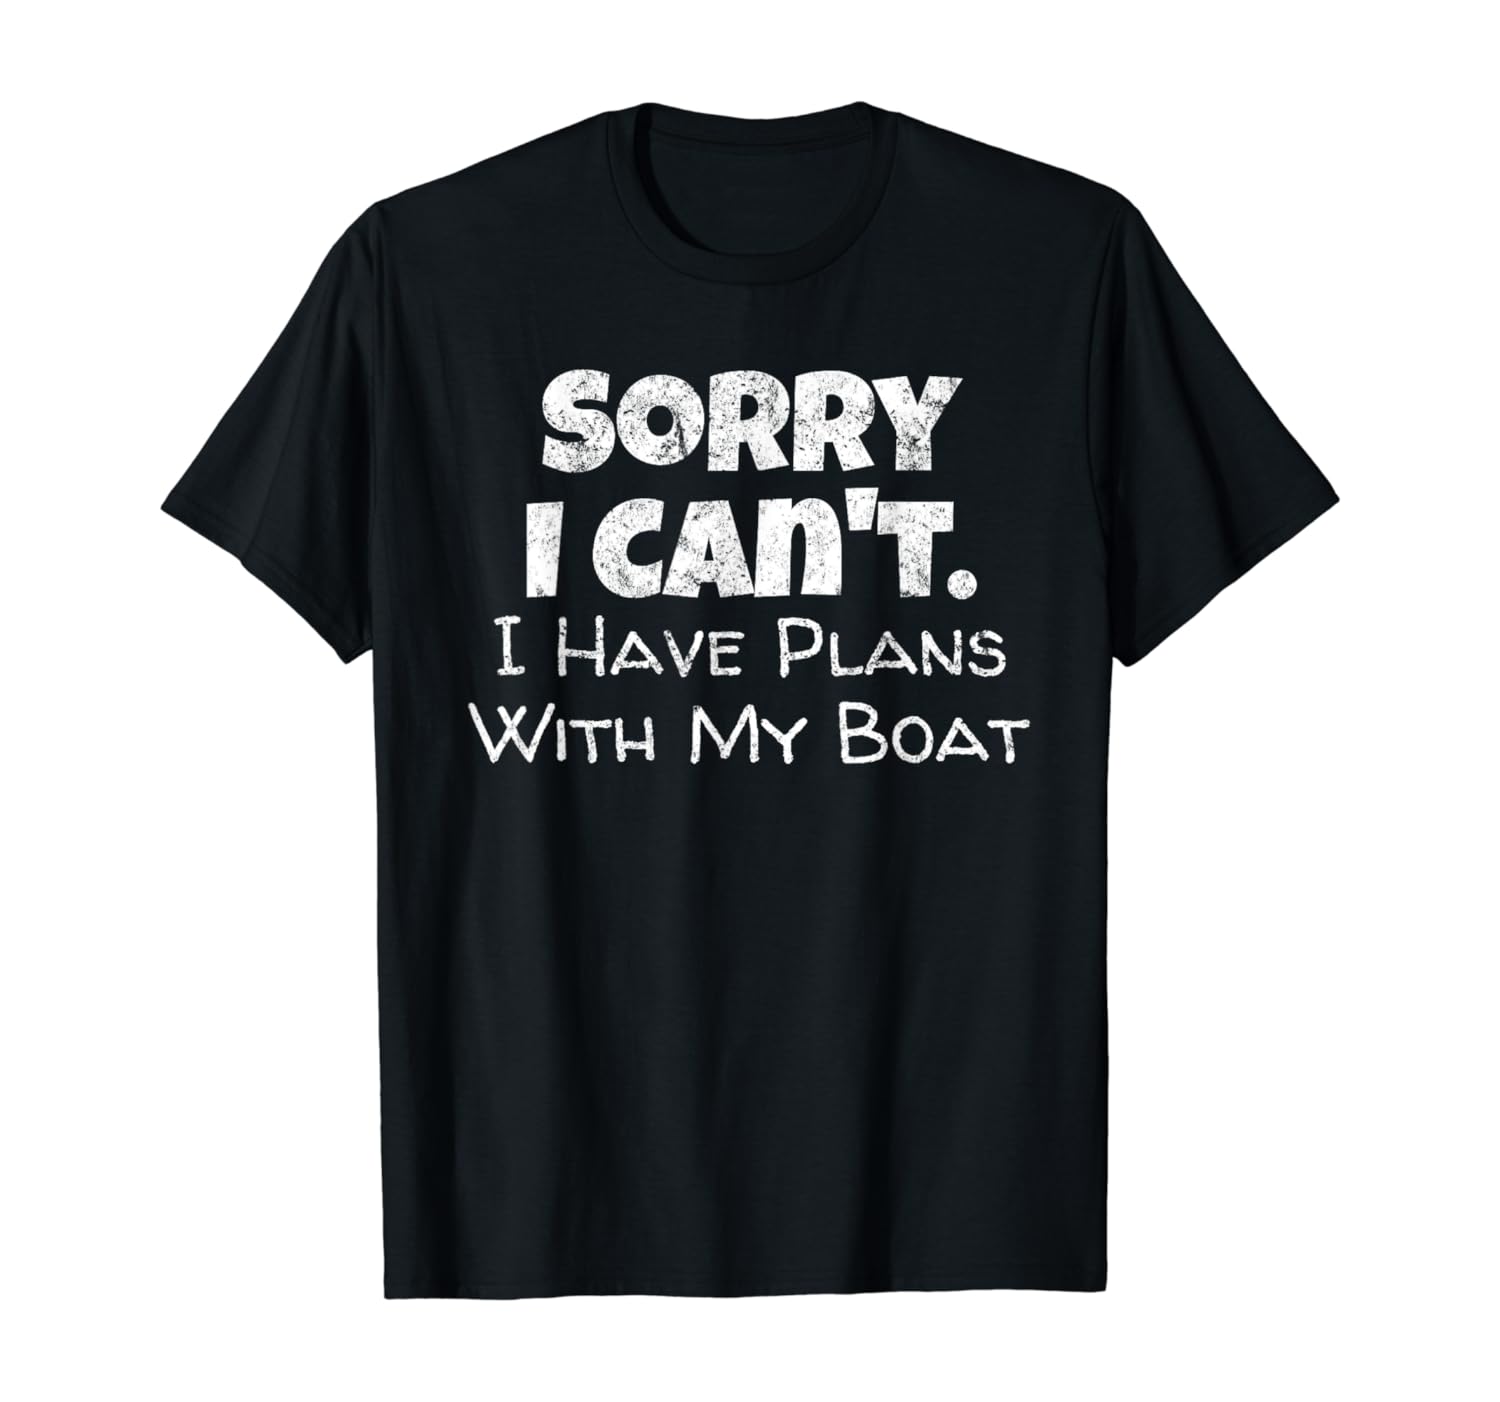 Funny Boating Shirt I Have Plans with my Boat Lake Tee T-Shirt